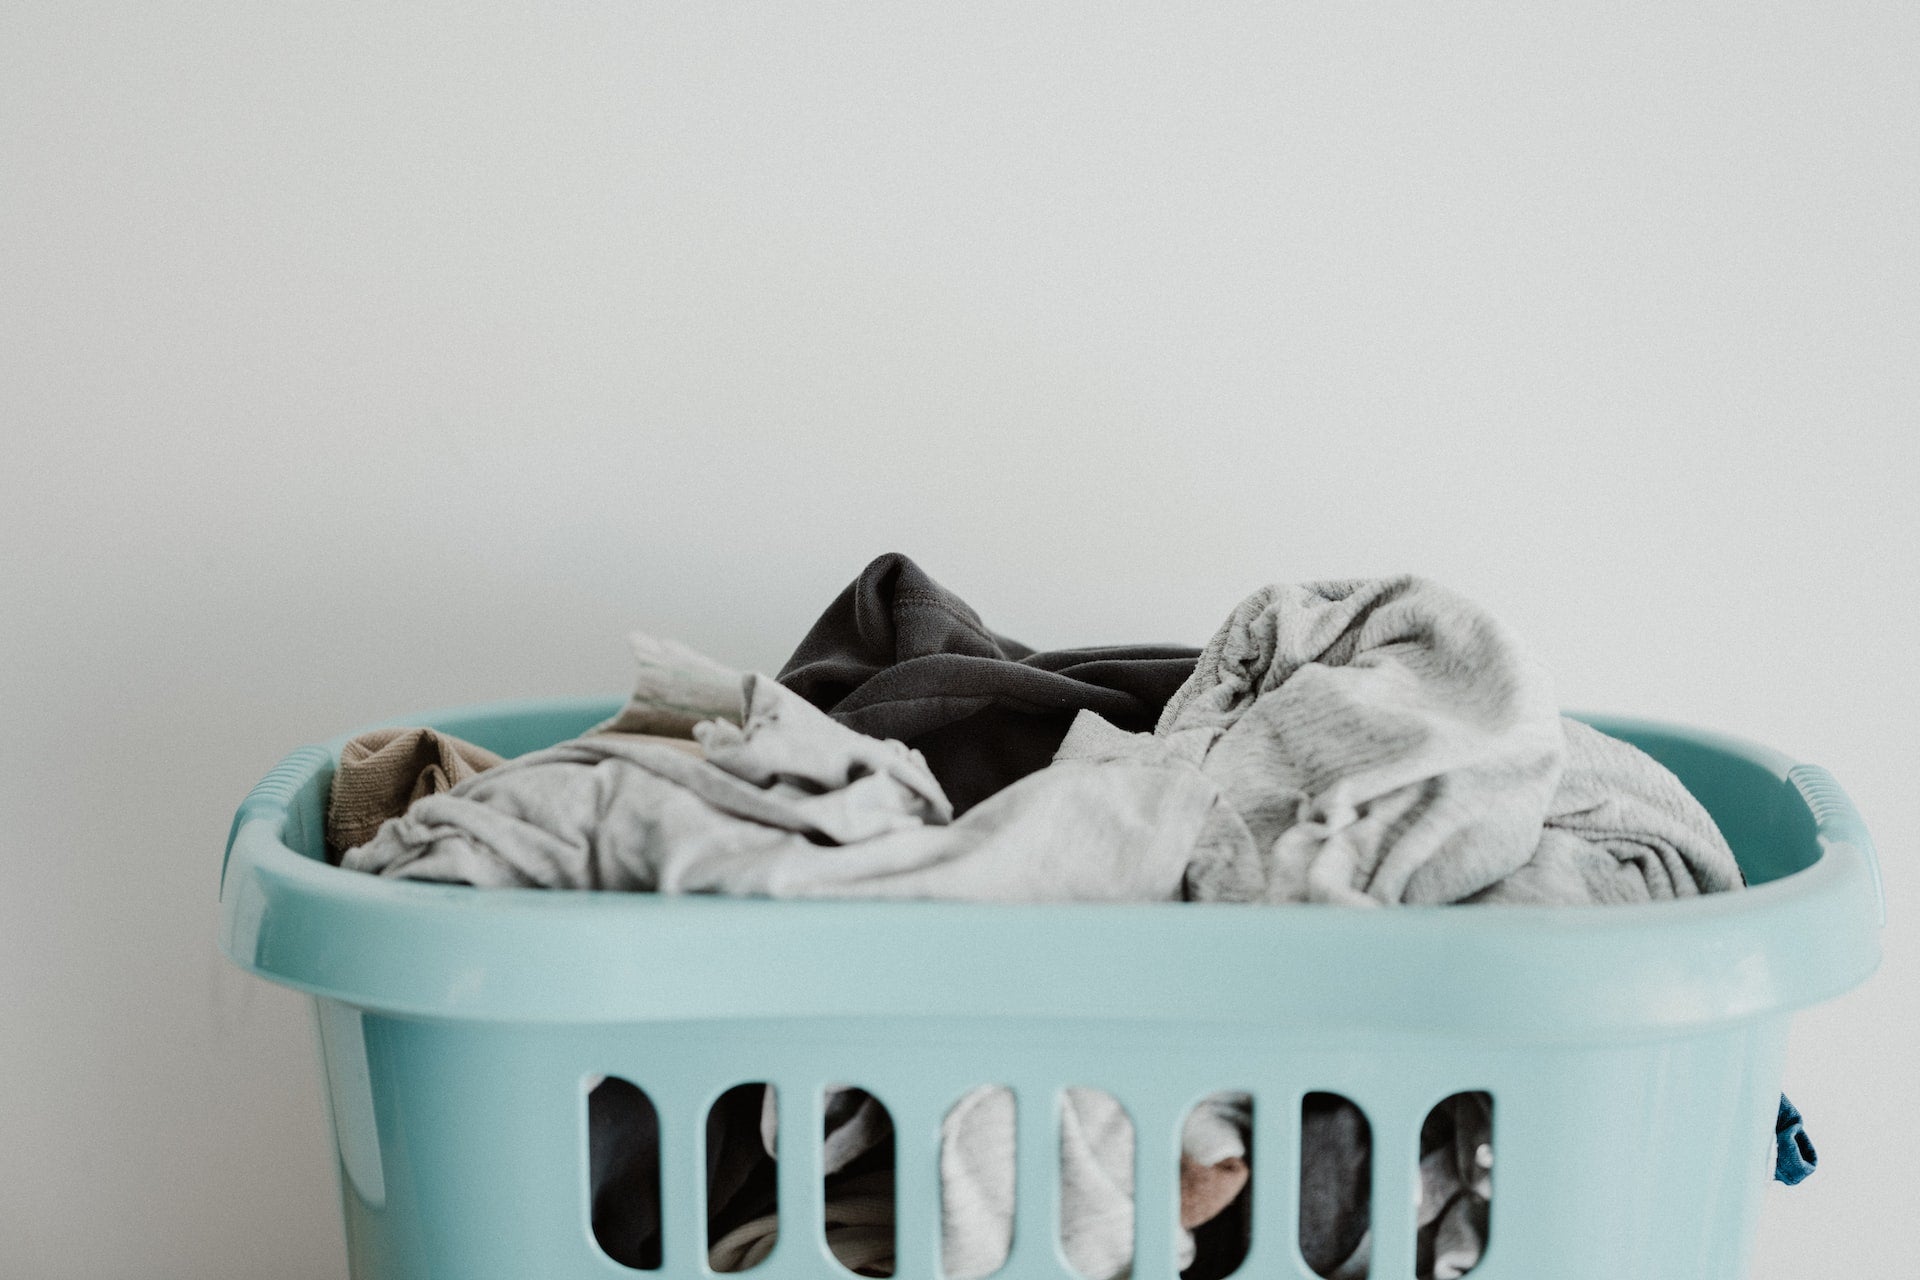 Why is it important to take care of your clothes